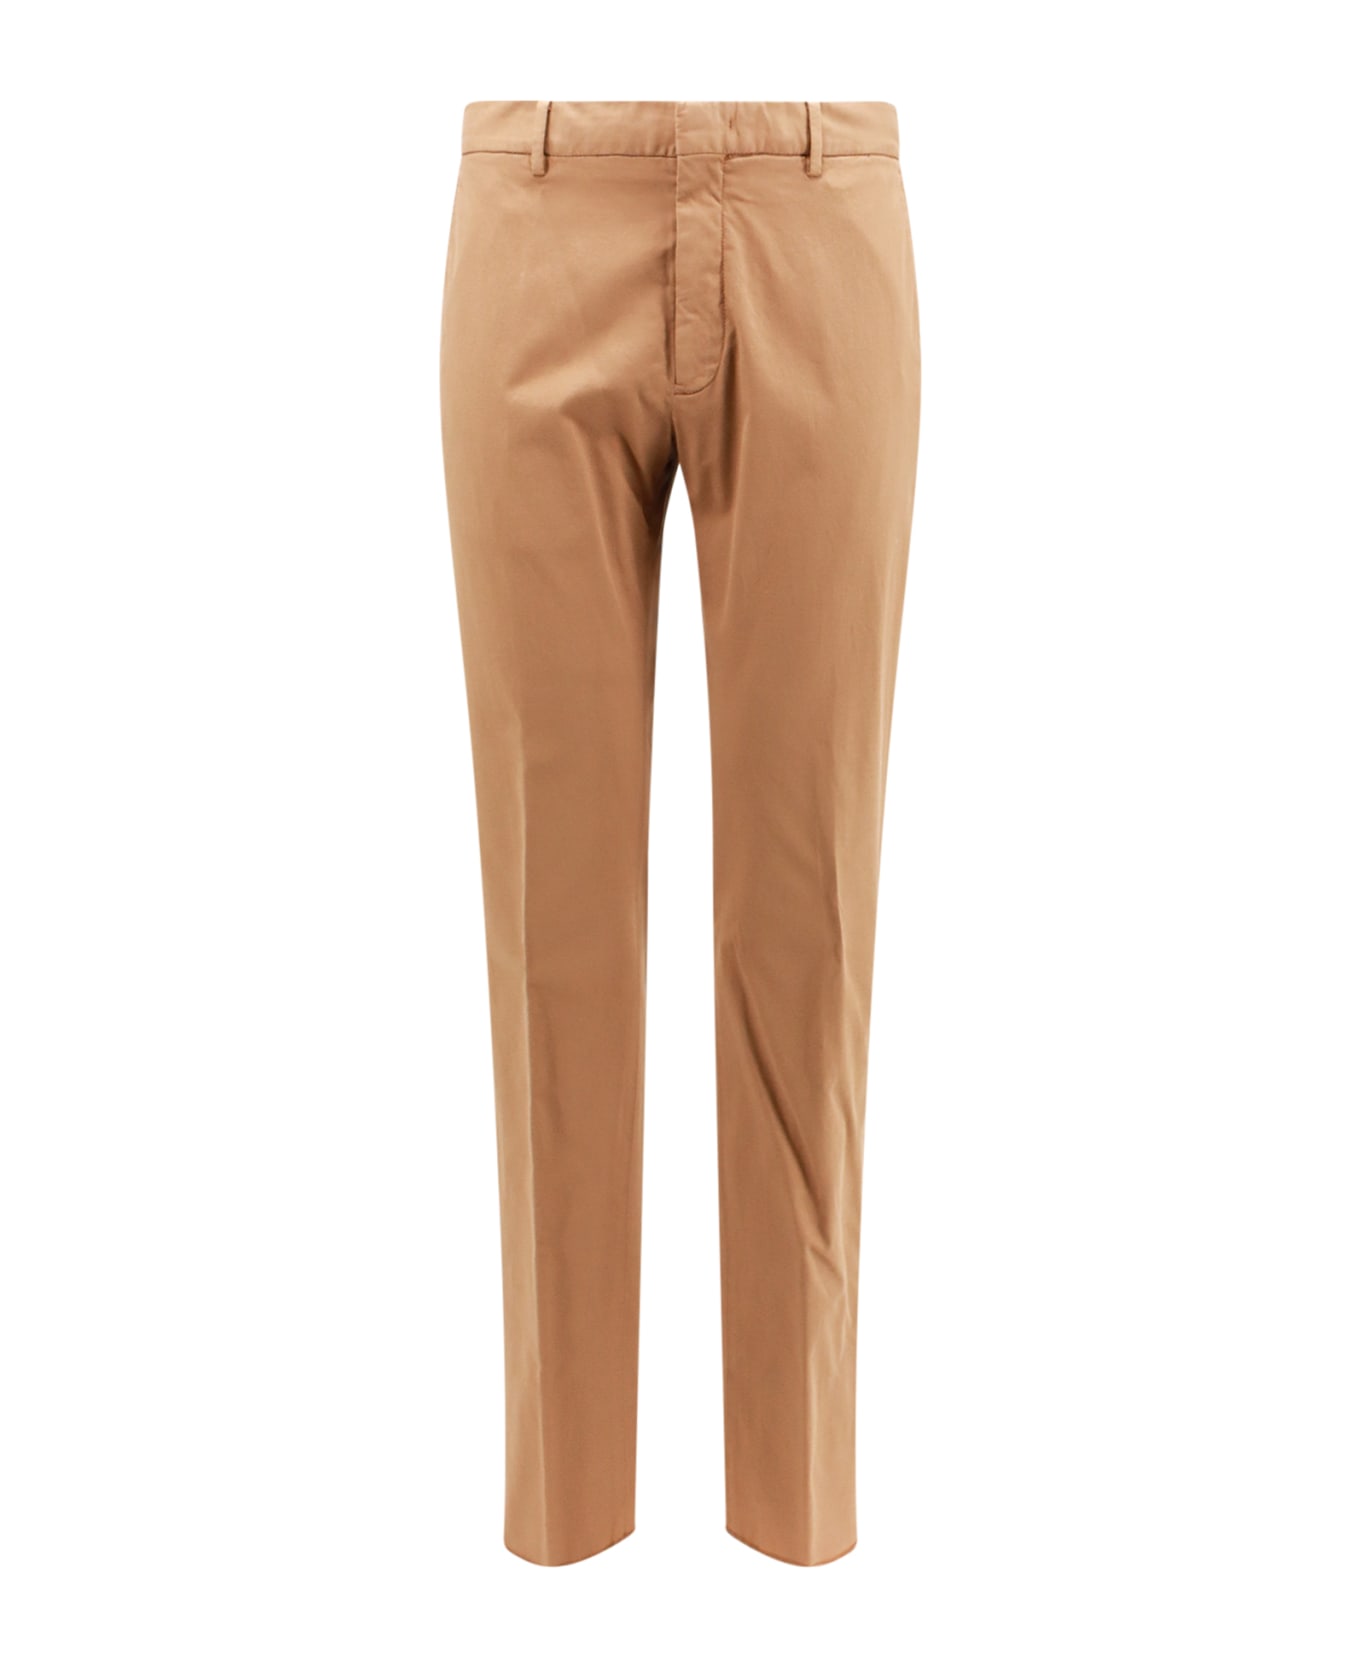 Zegna Trouser - Brown